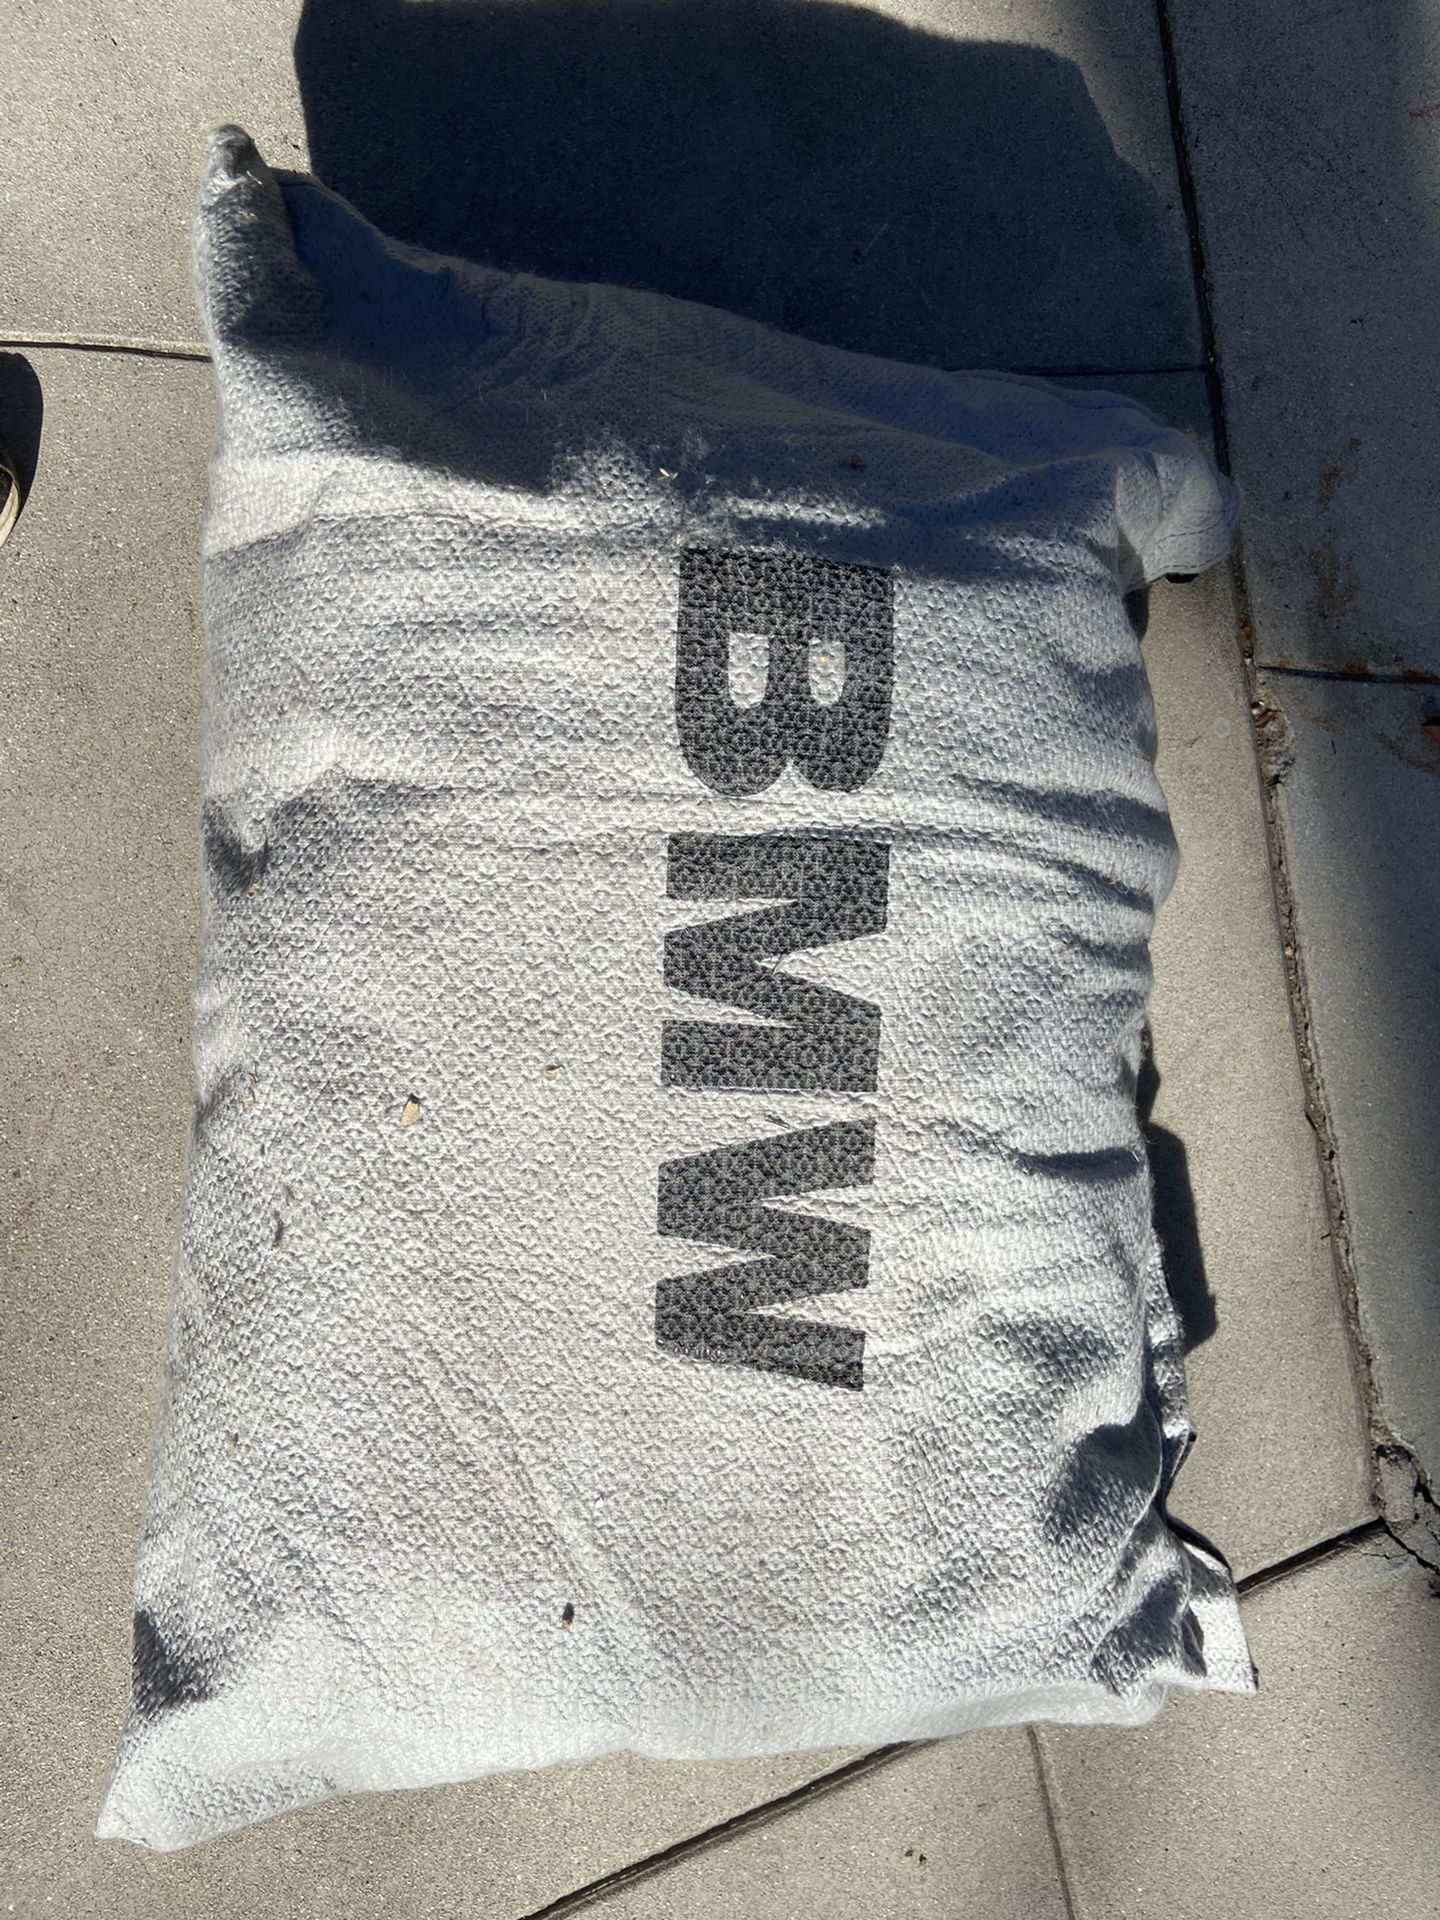 BMW Outdoor Car Cover - 3 Series (2010)